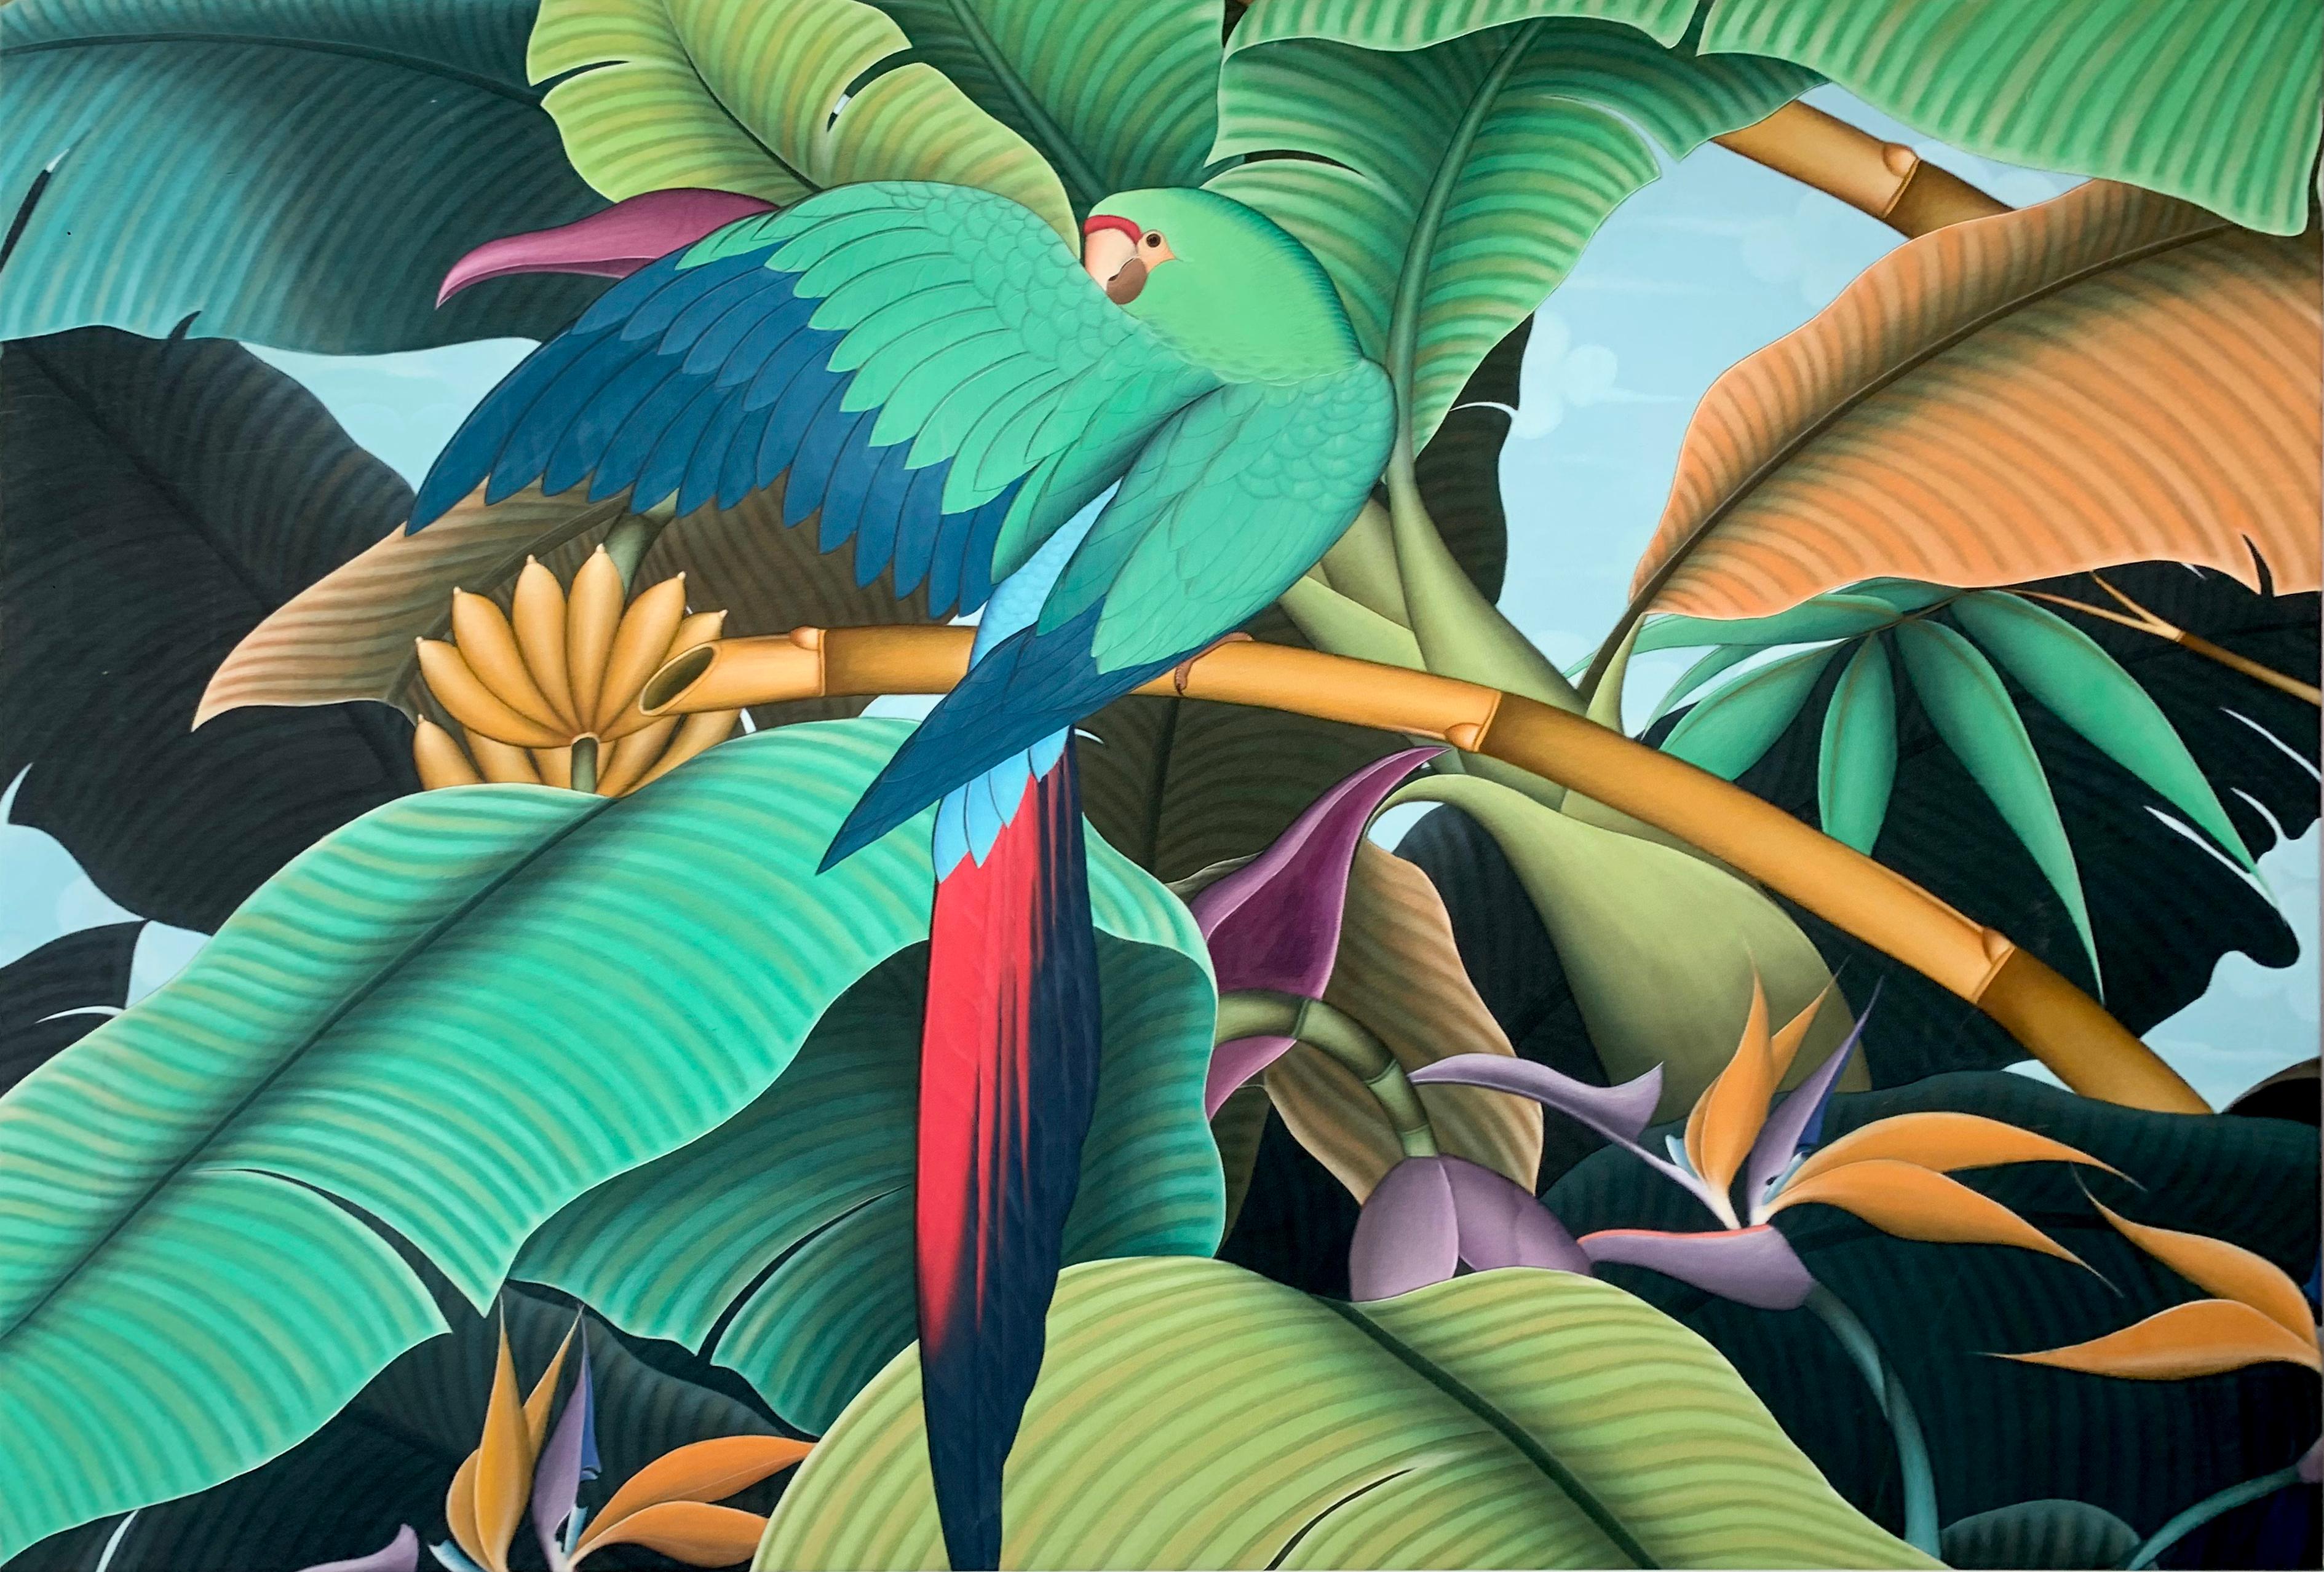 This is a beautiful painting of one big parrot sitting on a tree in the jungle. This original painting is elegant and a statement piece.
Contemporary painting full of details and colors, inspired by beautiful parts of nature that need more